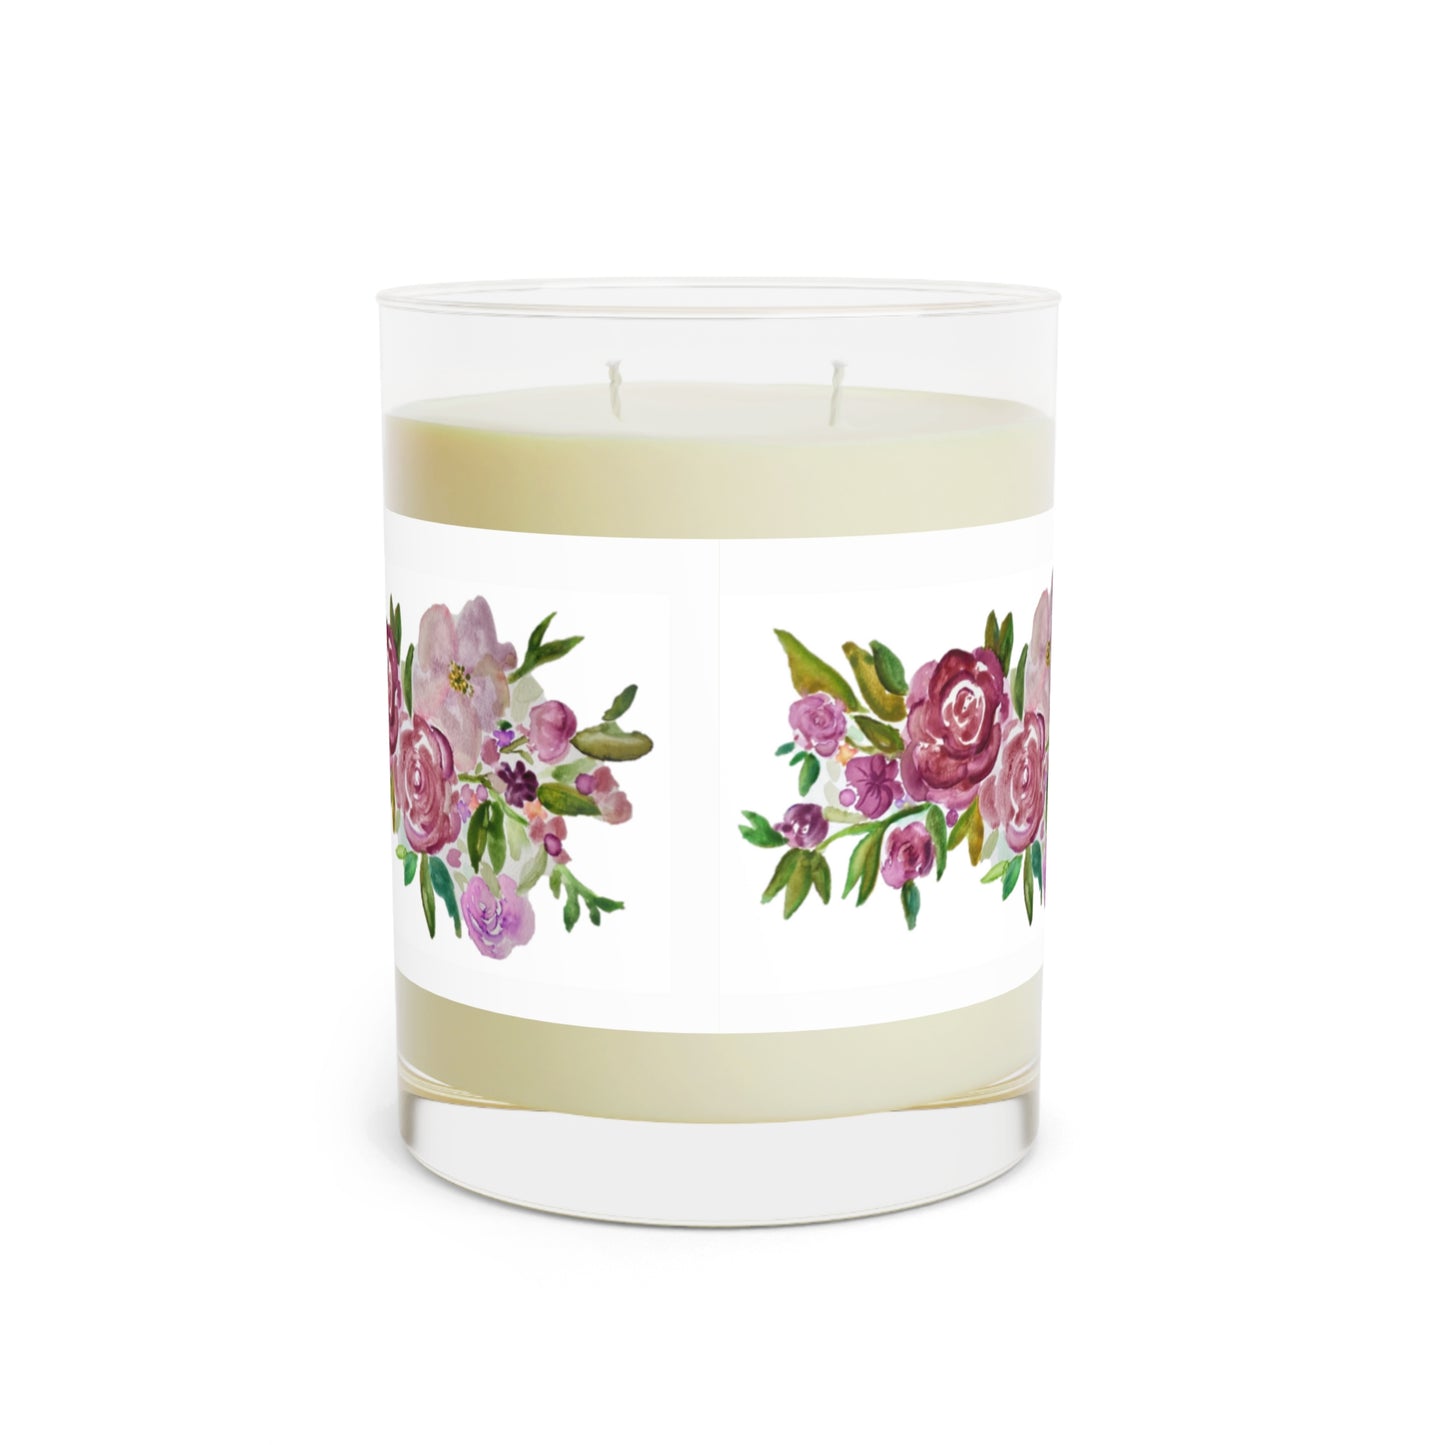 Wing Light Art Designs Mother's Day Floral Scented Candle - Full Glass, 11oz